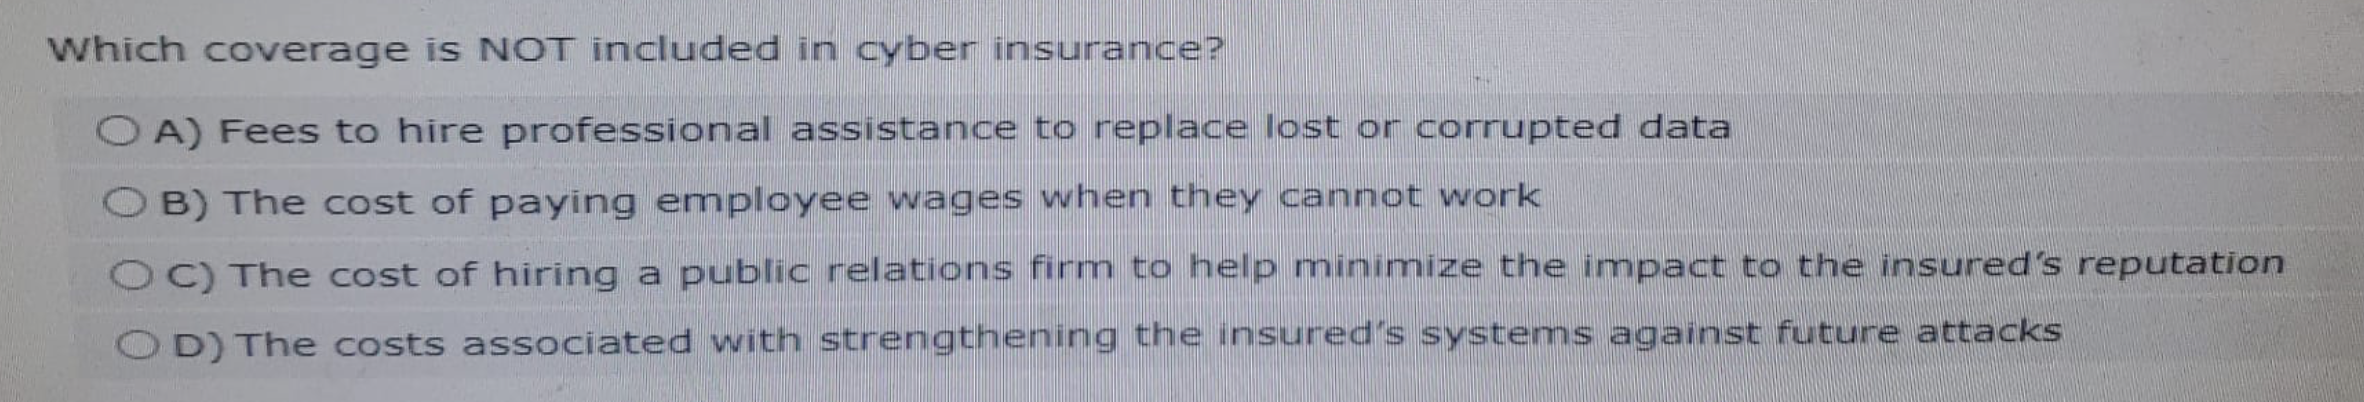 Which coverage is NOT included in cyber insurance?
OA) Fees to hire professional assistance to replace lost or corrupted data
OB) The cost of paying employee wages when they cannot work
OC) The cost of hiring a public relations firm to help minimize the impact to the insured's reputation
OD) The costs associated with strengthening the insured's systems against future attacks